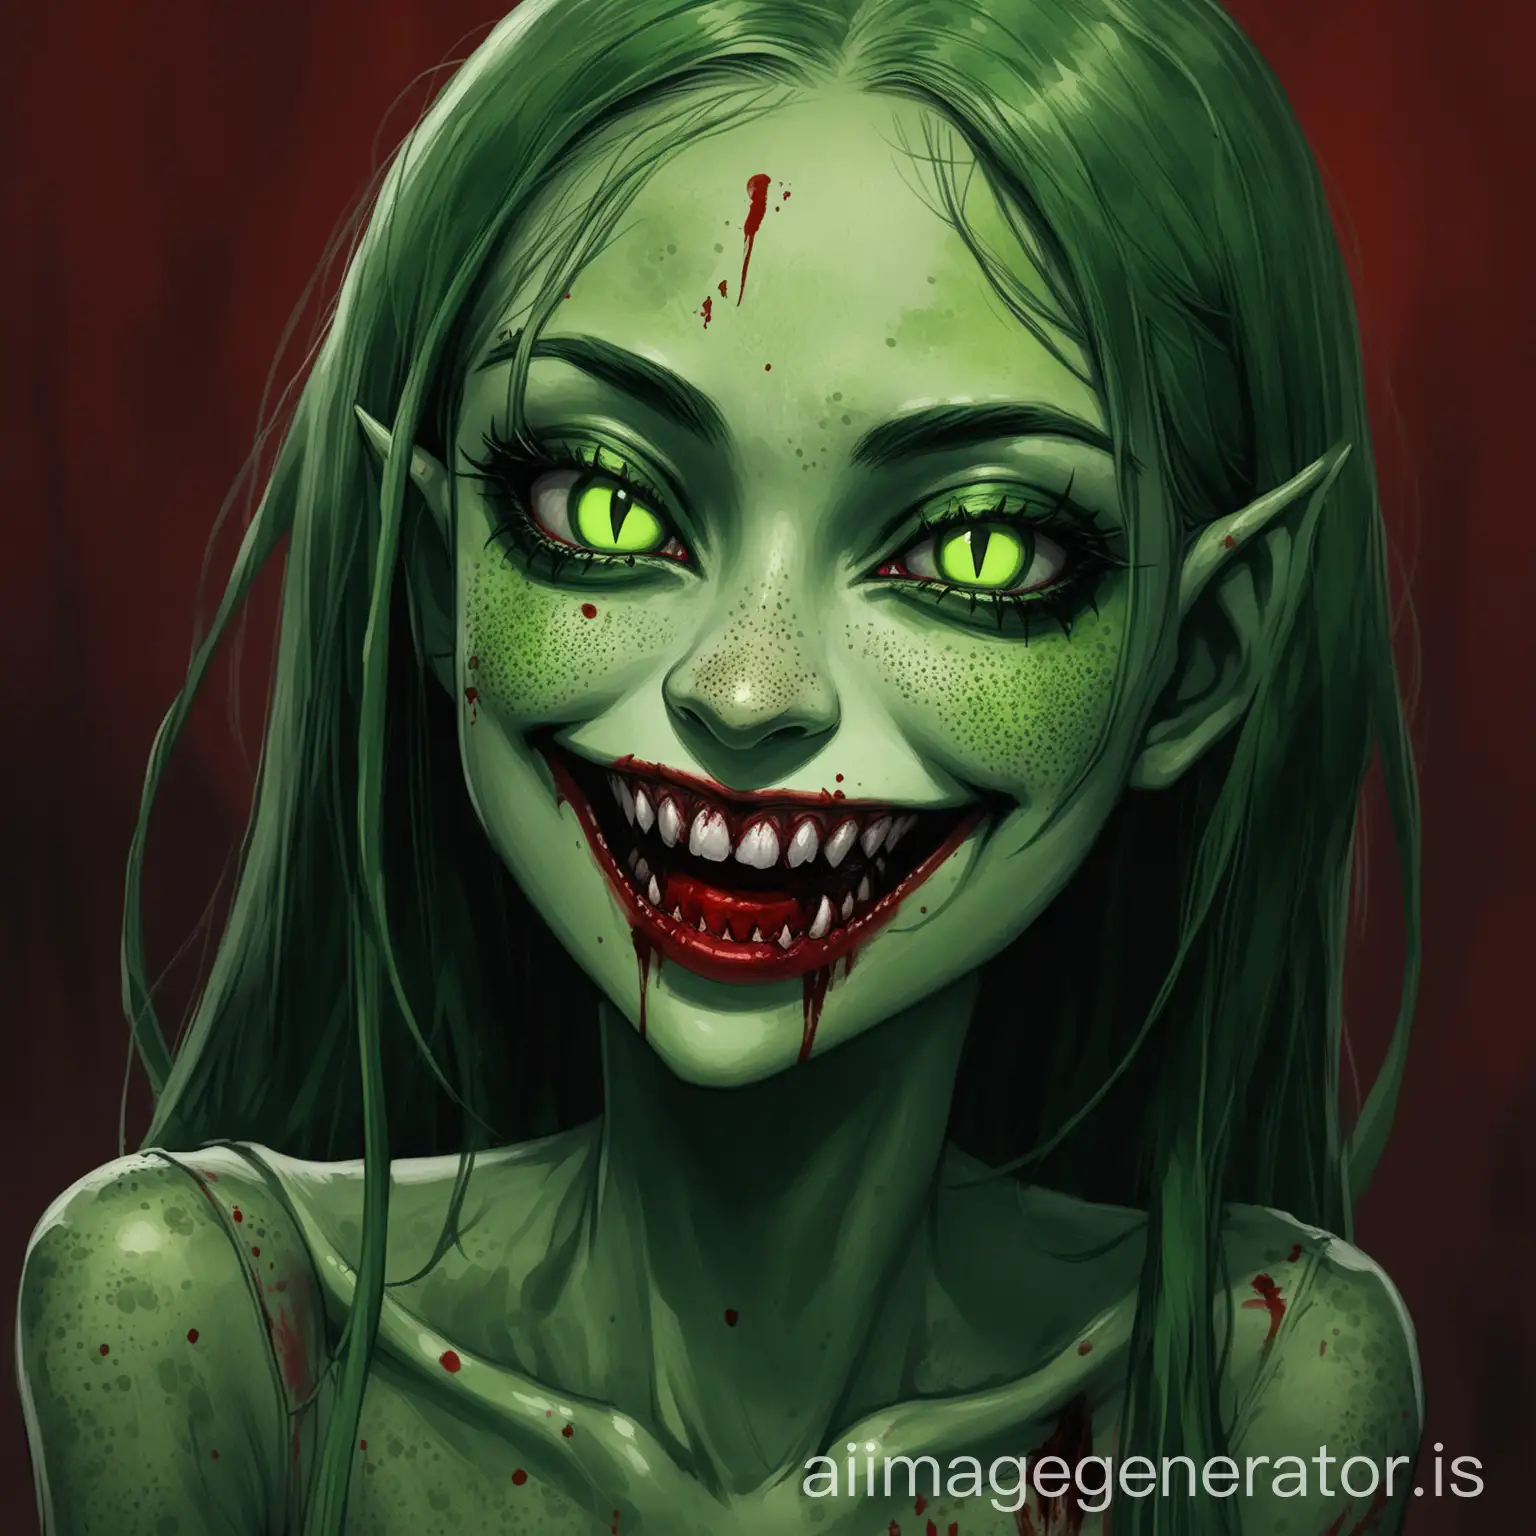 Smiling-GreenSkinned-Vampire-Girl-with-Long-Fangs-and-Bloodstained-Lips